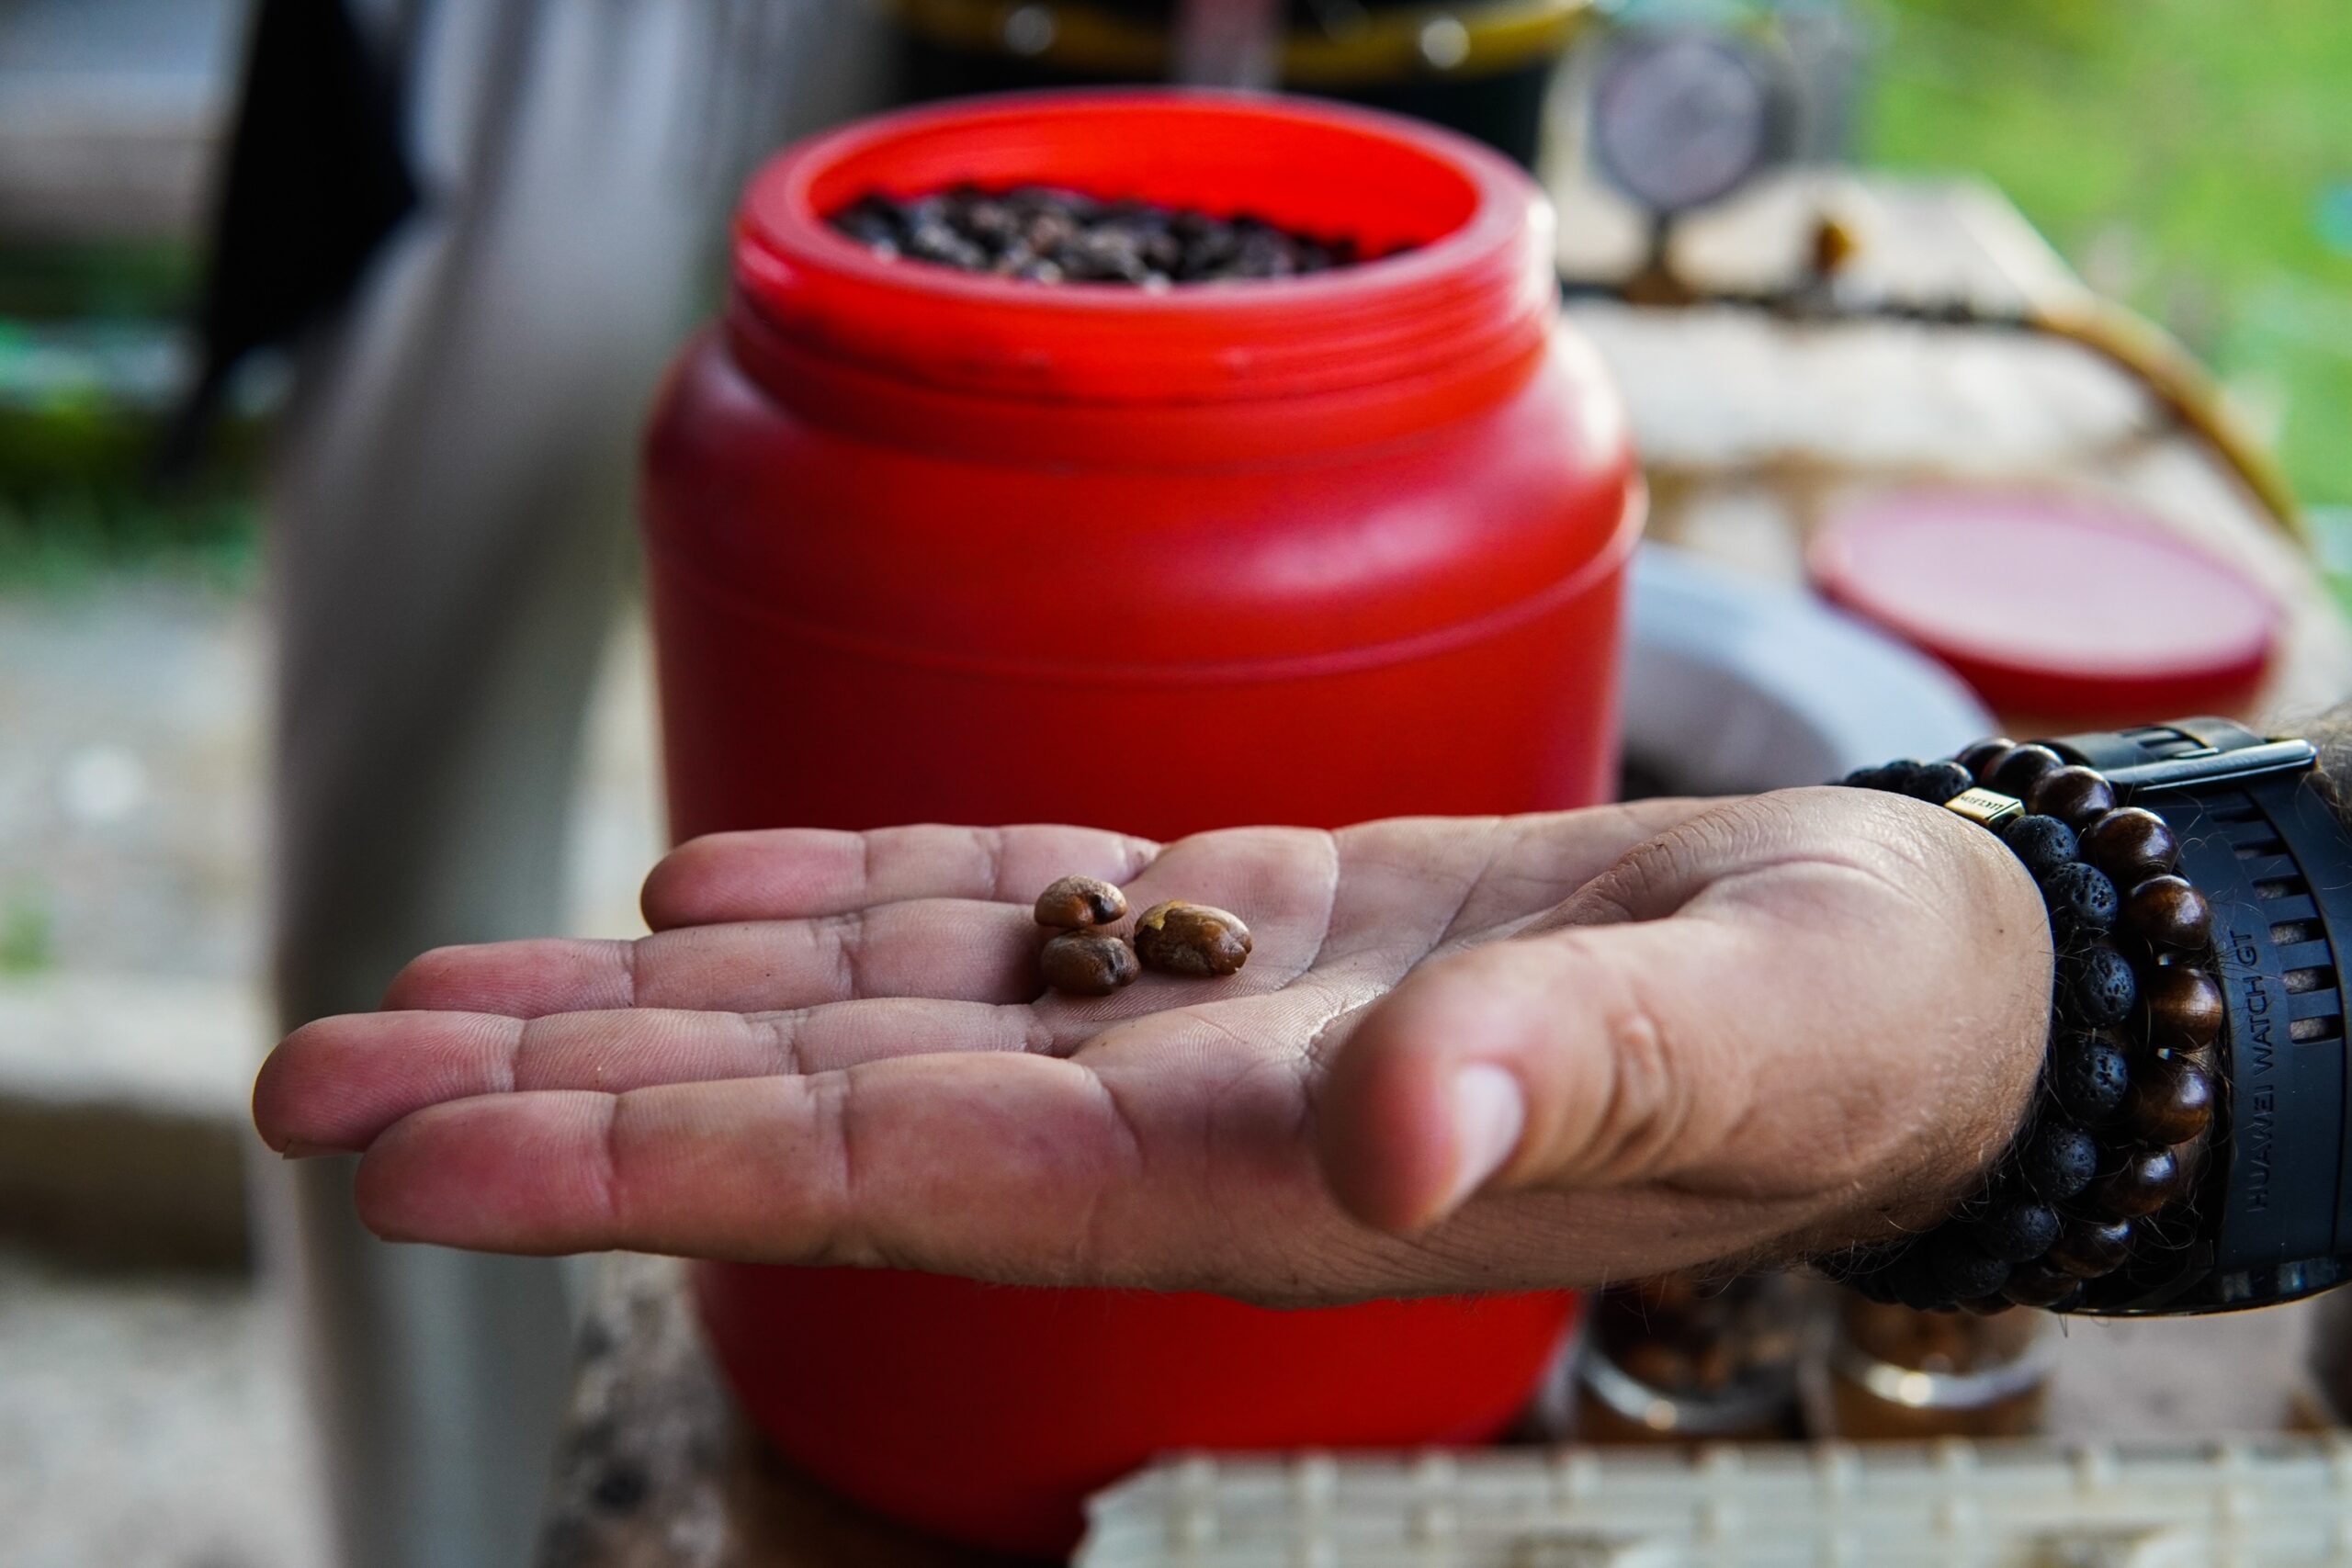 Our guide's hand holding roasted coffee beans during our Medellin coffee tour.